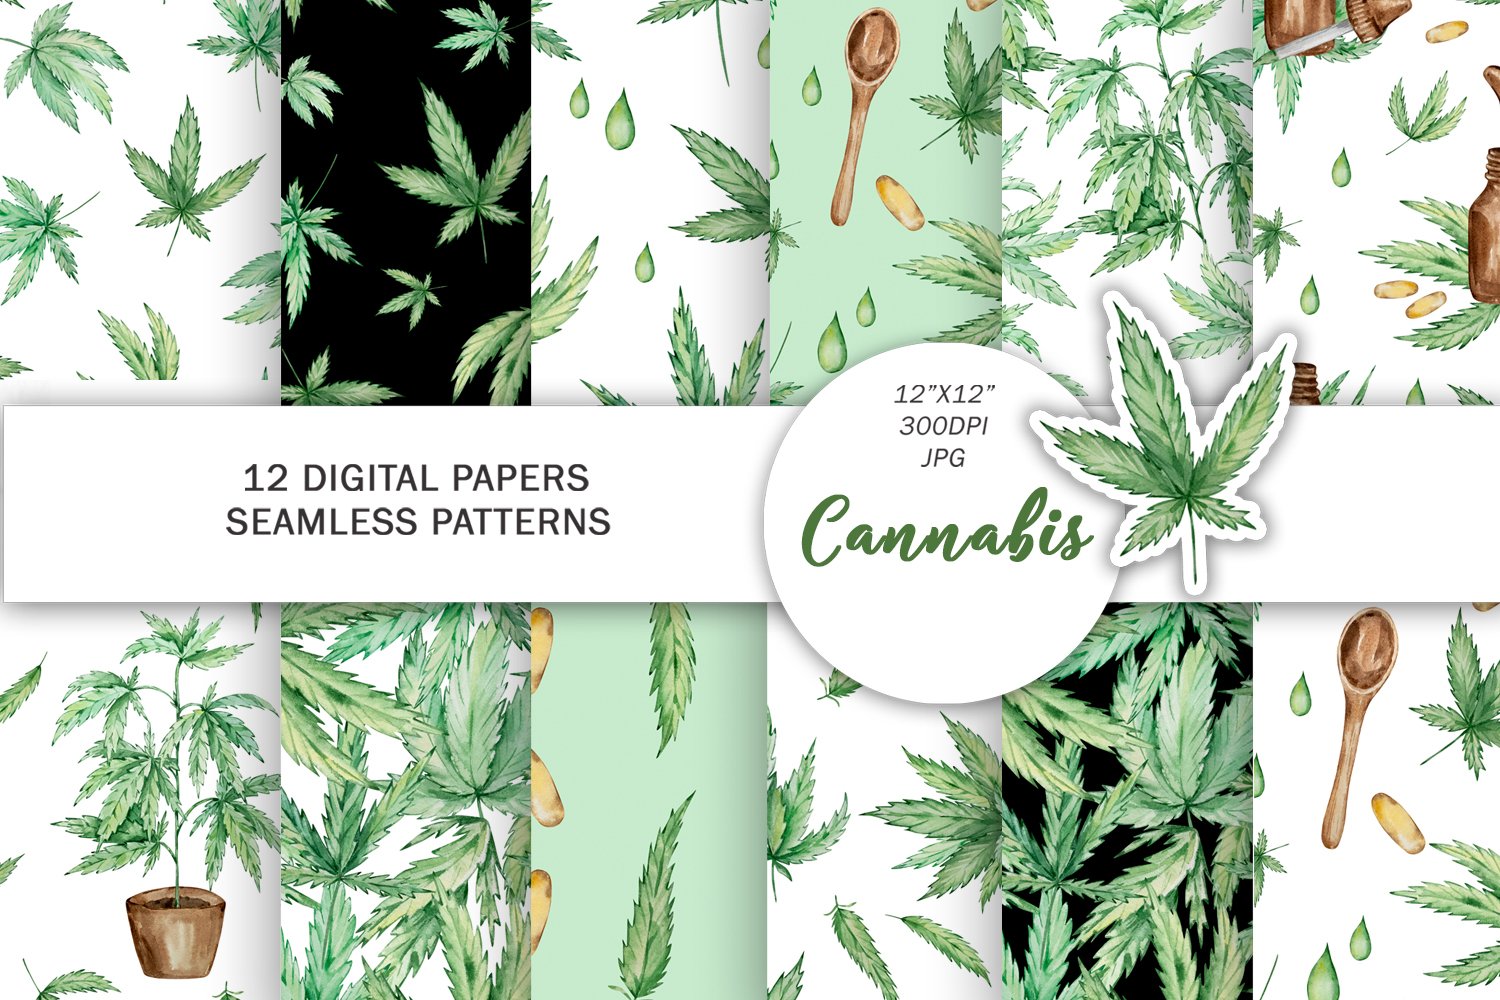 Cover image of Cannabis watercolor digital paper.